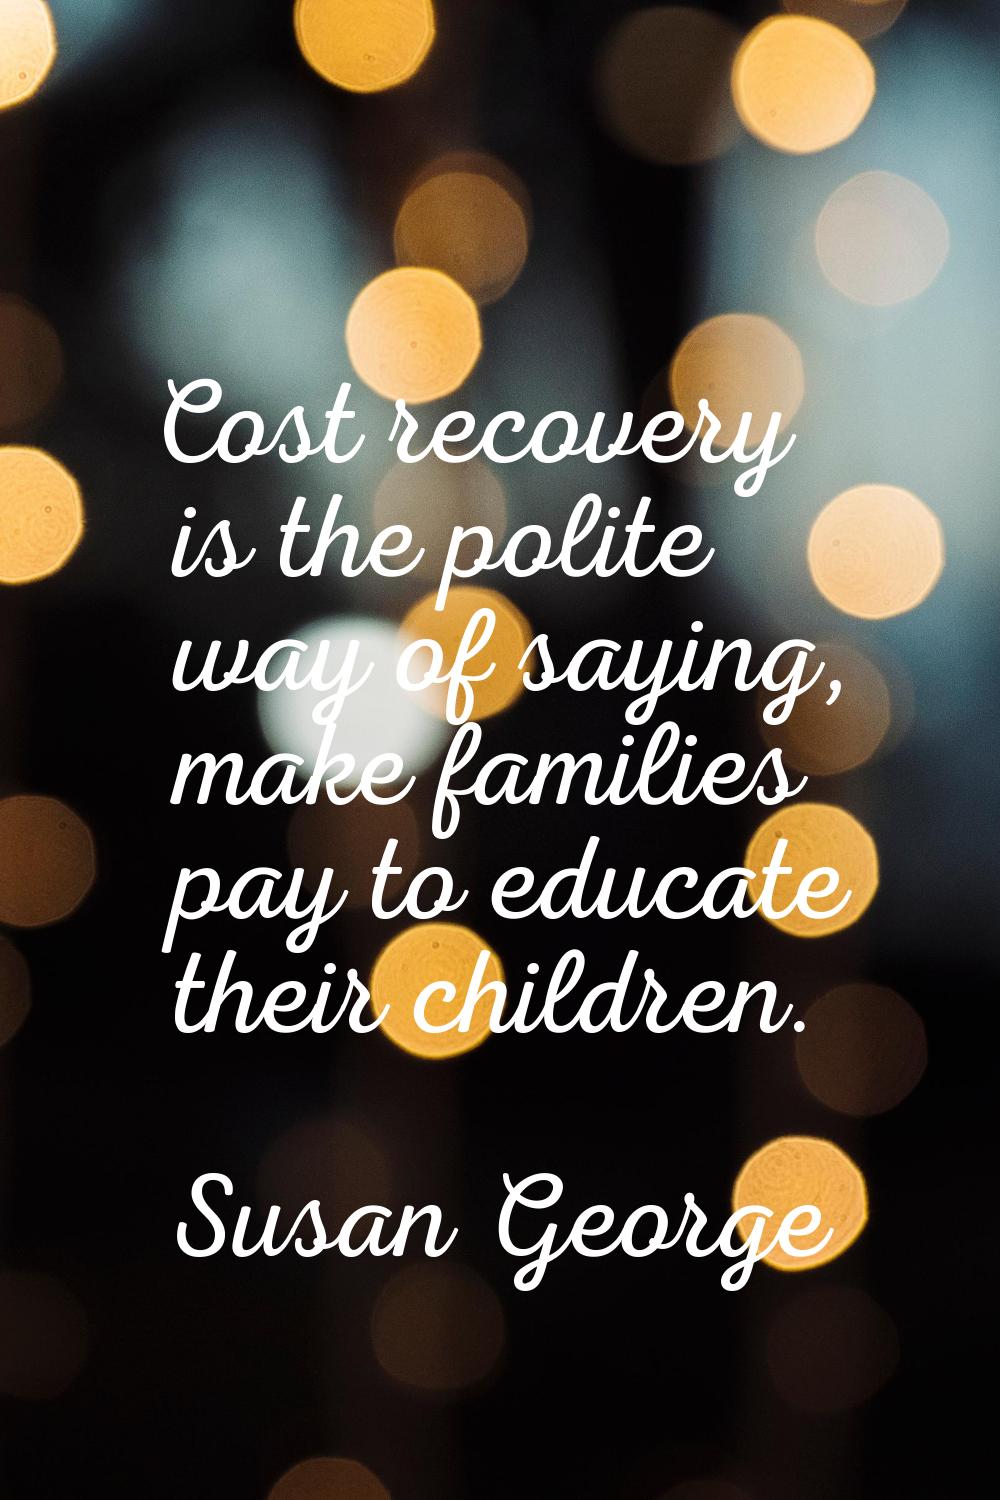 Cost recovery is the polite way of saying, make families pay to educate their children.